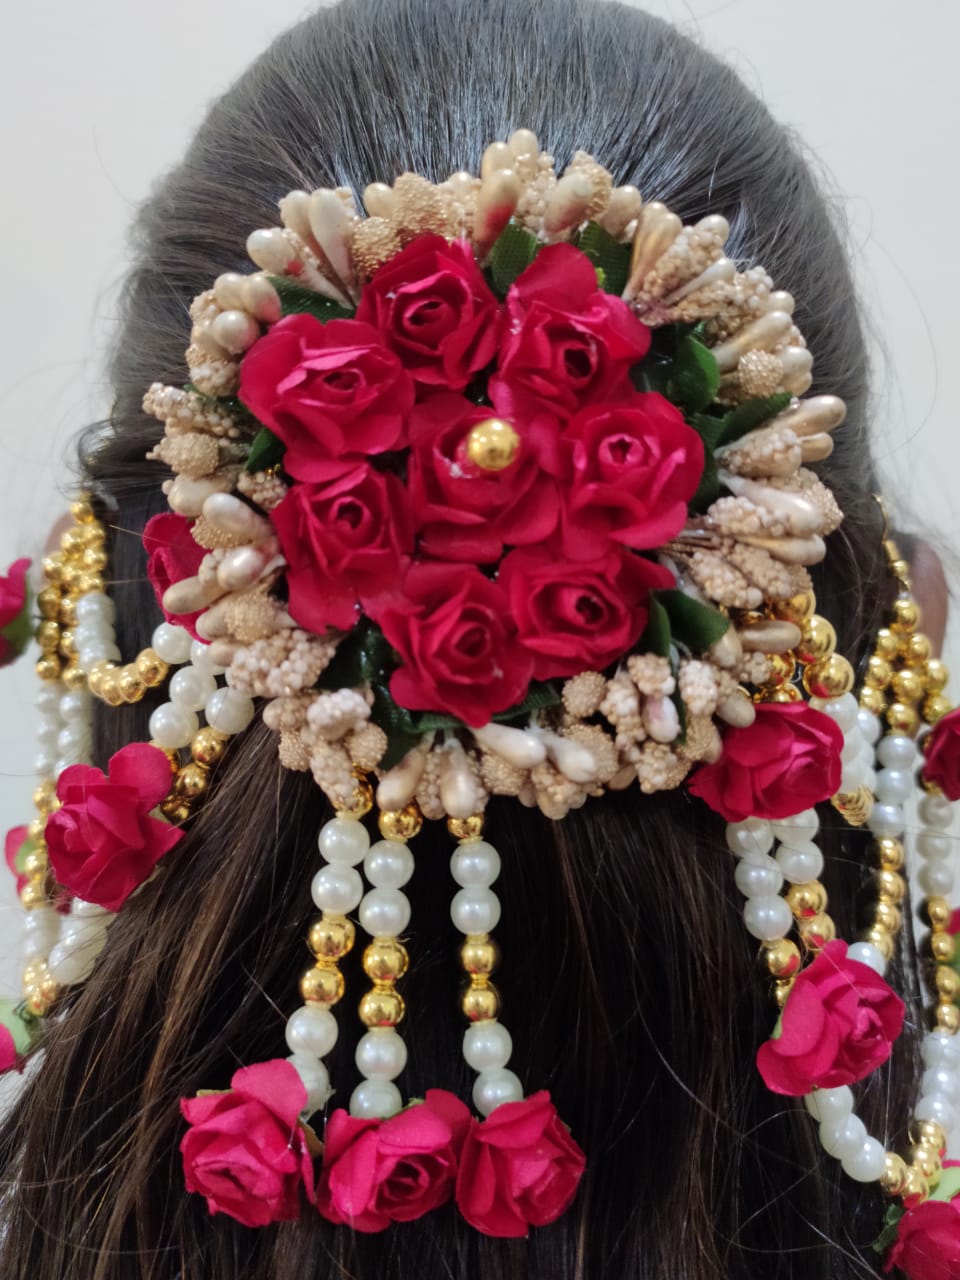 Buy 5 Pieces Lot Artificial Gajra Hair Accessories Flower Online in India   Etsy